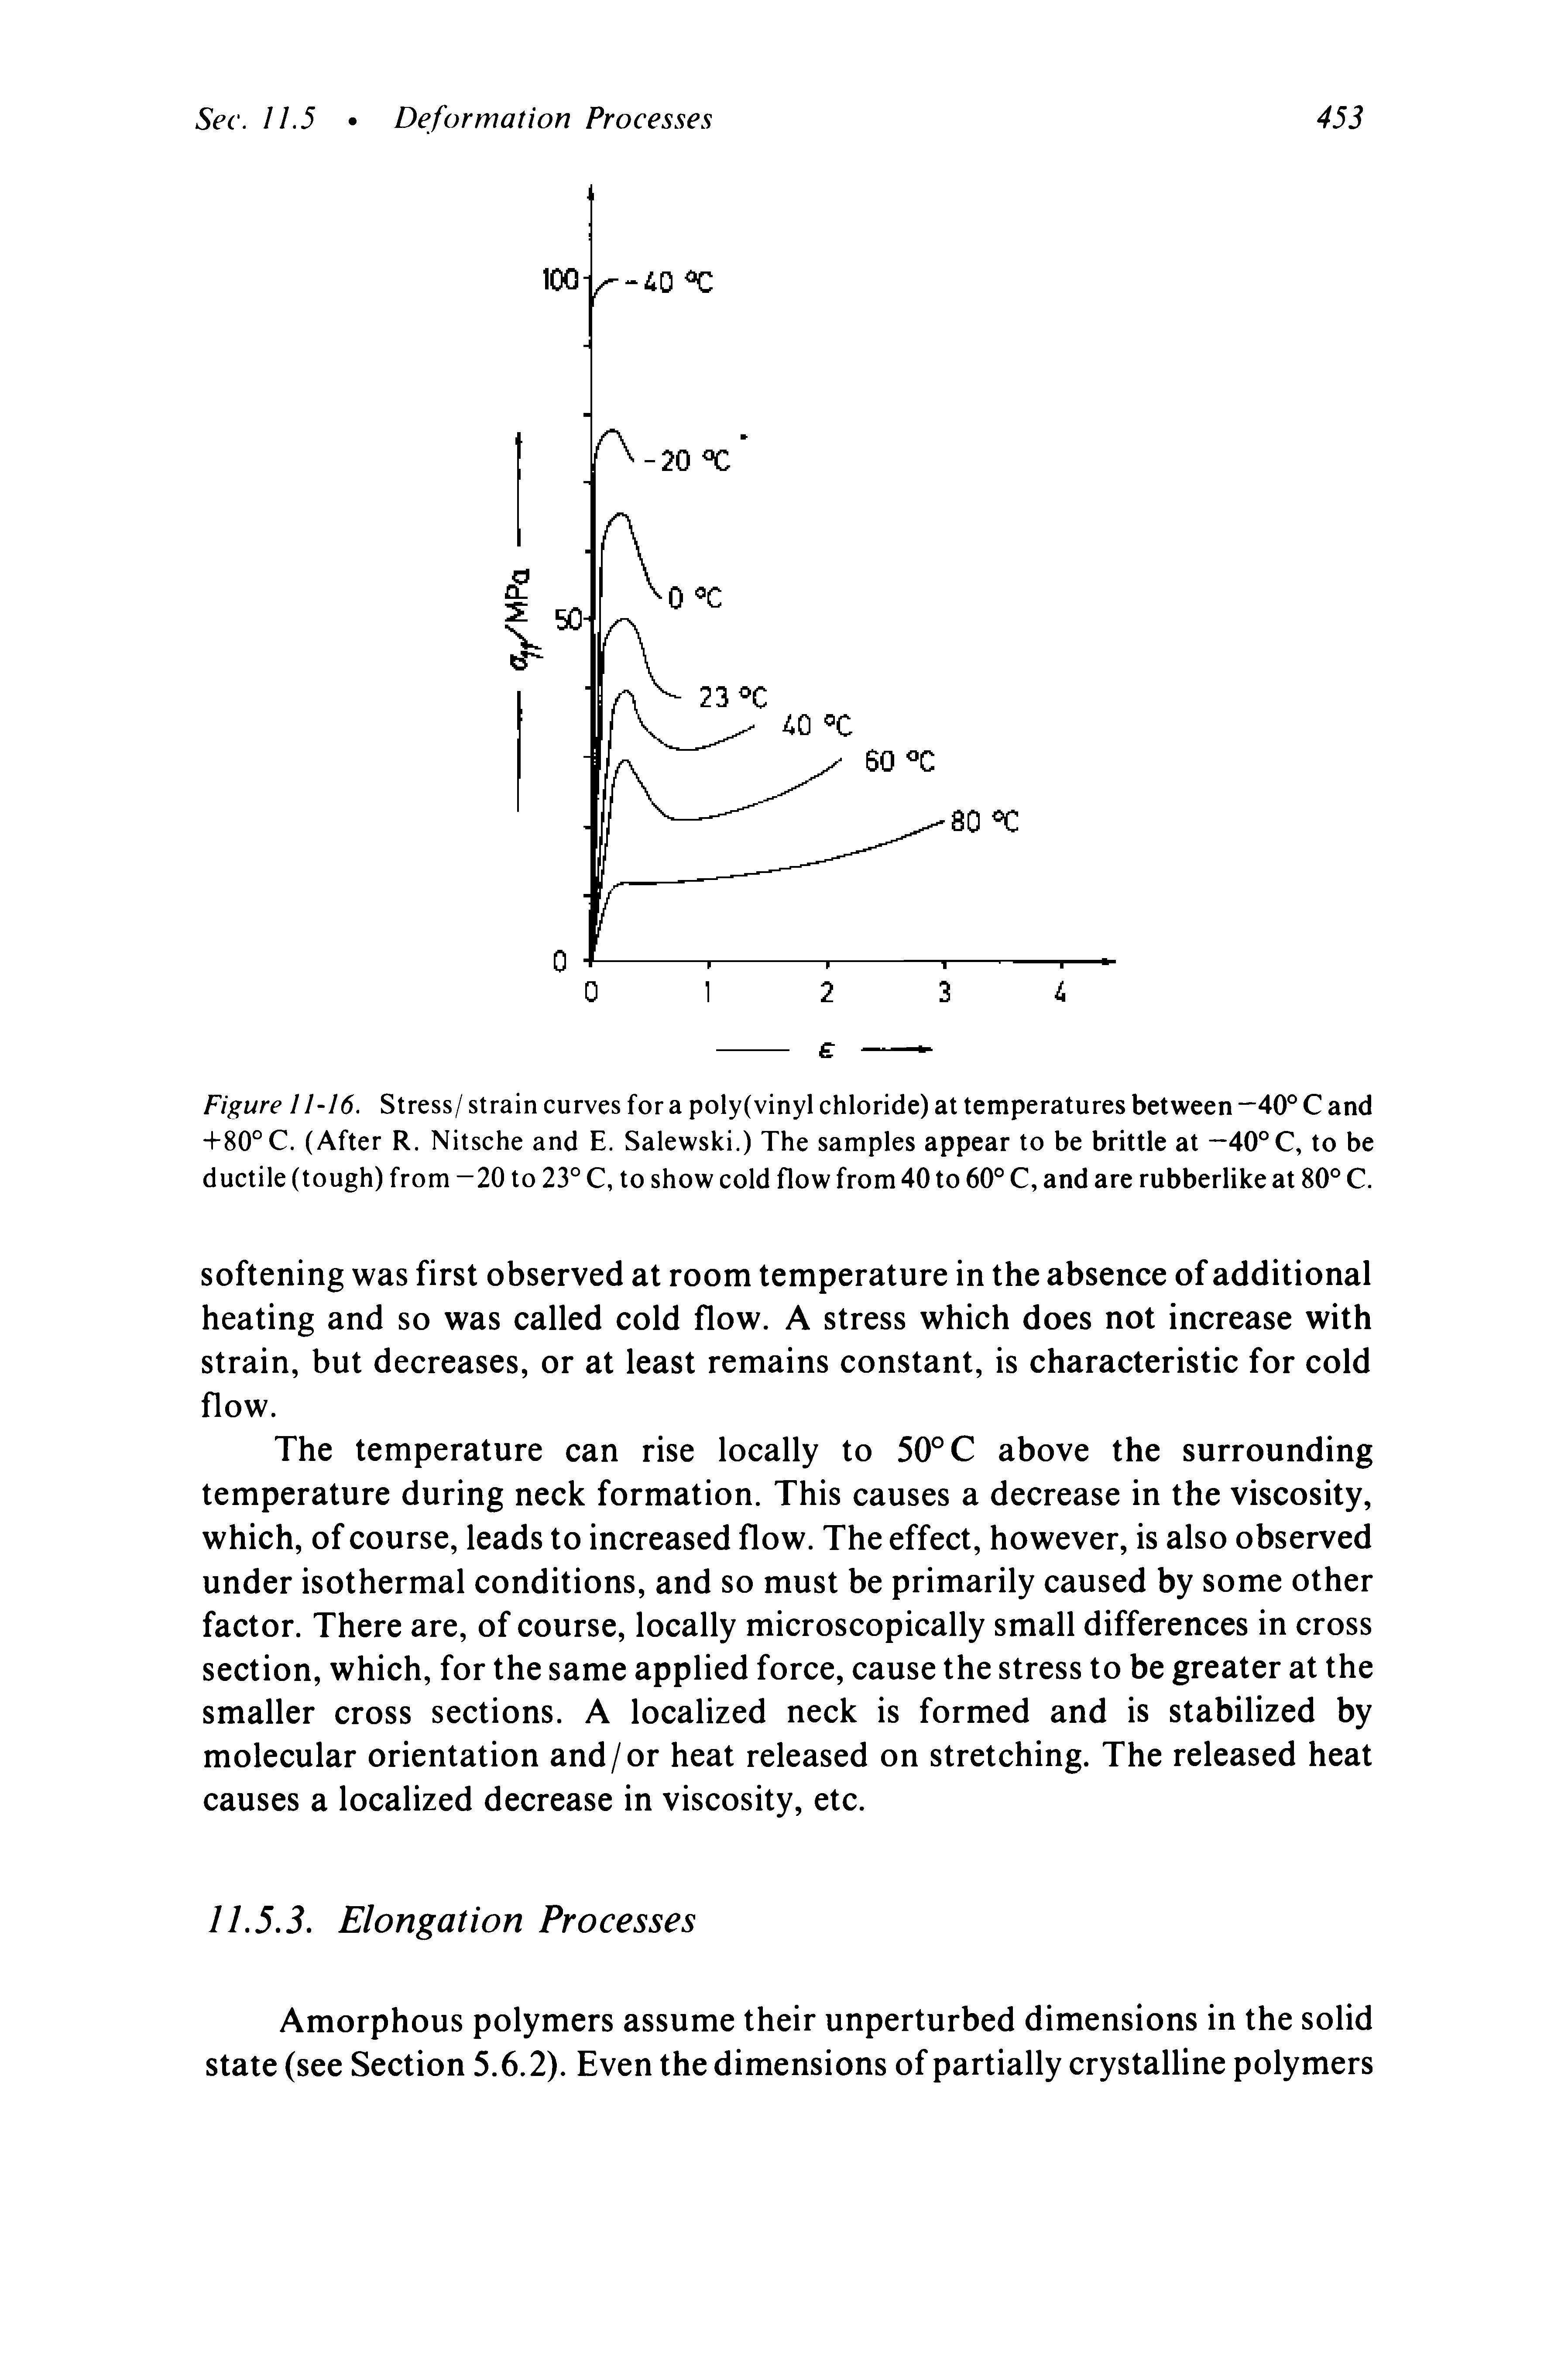 Figure 11-16. Stress/ strain curves for a poly(vinyl chloride) at temperatures between —40° C and +80° C. (After R. Nitsche and E. Salewski.) The samples appear to be brittle at —40°C, to be ductile (tough) from -20 to 23° C, to show cold flow from 40 to 60° C, and are rubberlike at 80° C.